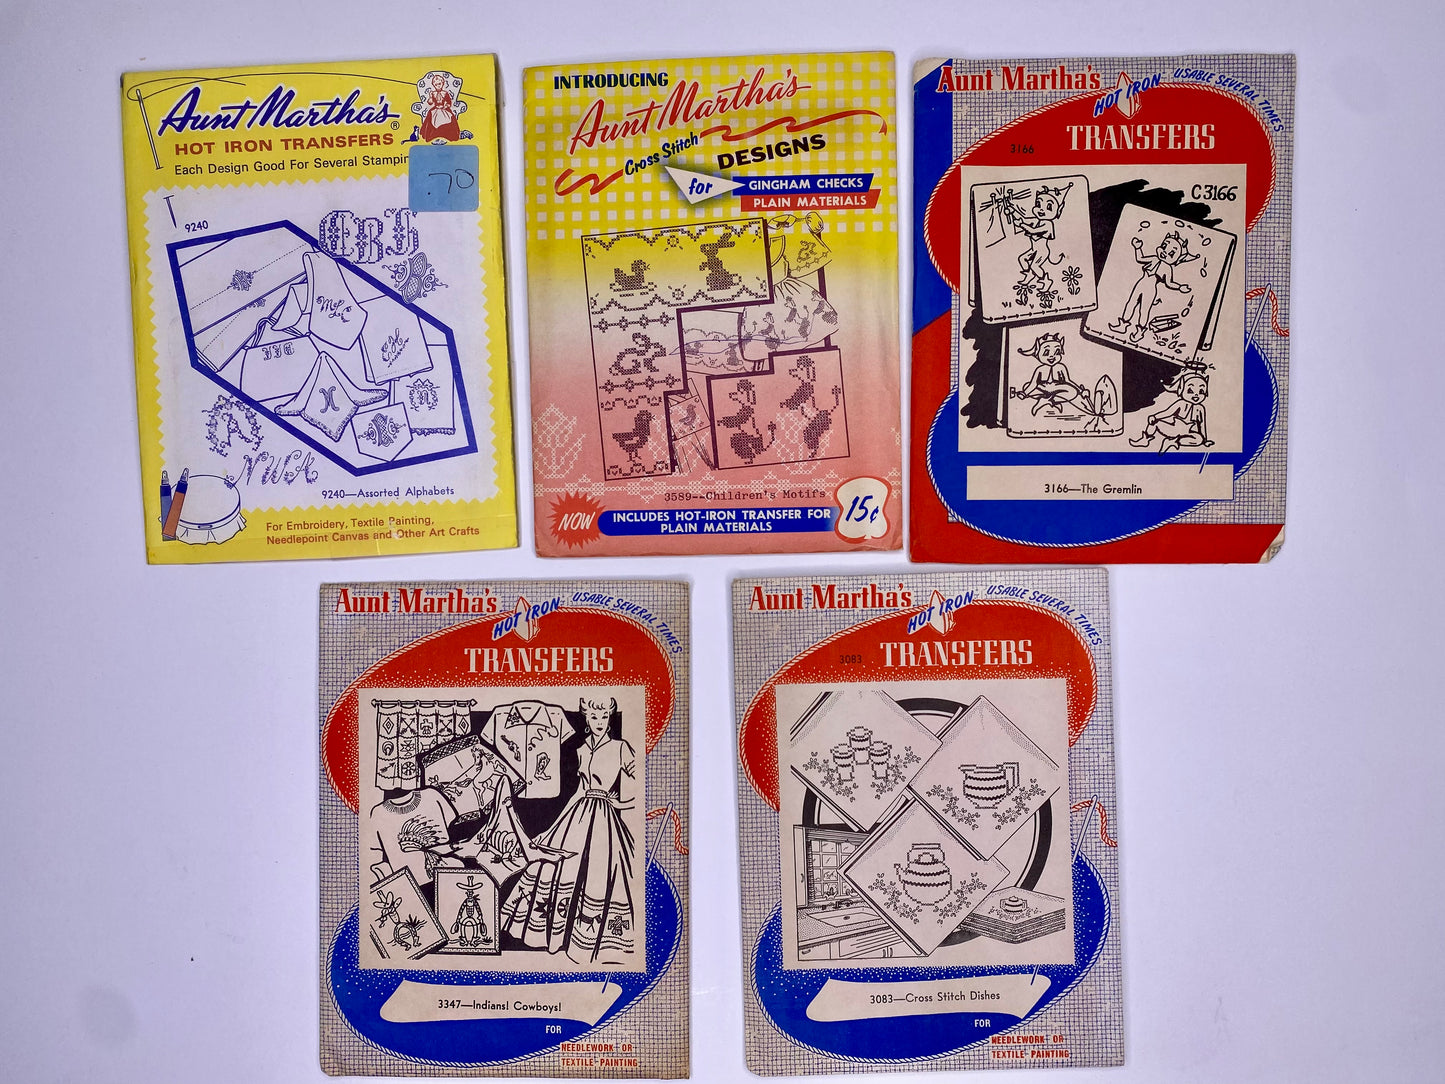 Aunt Martha's Hot Iron Transfers 9240 Assorted Alphabets, 3347 Cowboys and Indians, 3589 Childrens motifs, 3166 The Gremlin, 3083 Cross Stitch Dishes